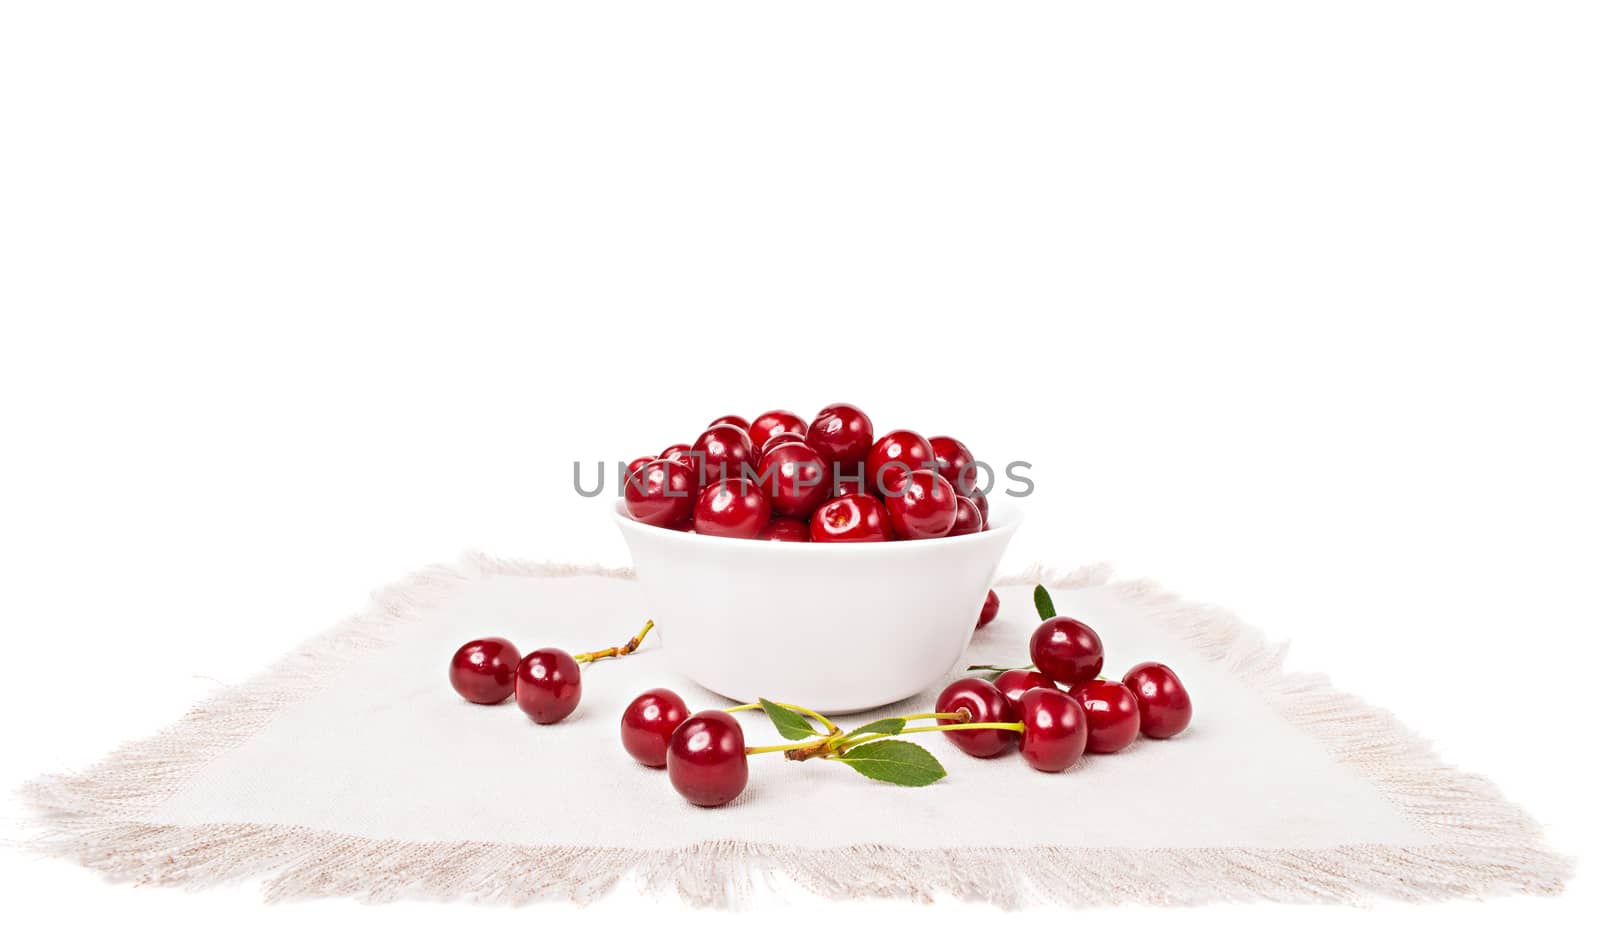 Sweet juicy cherries in a bowl on the napkin isolated